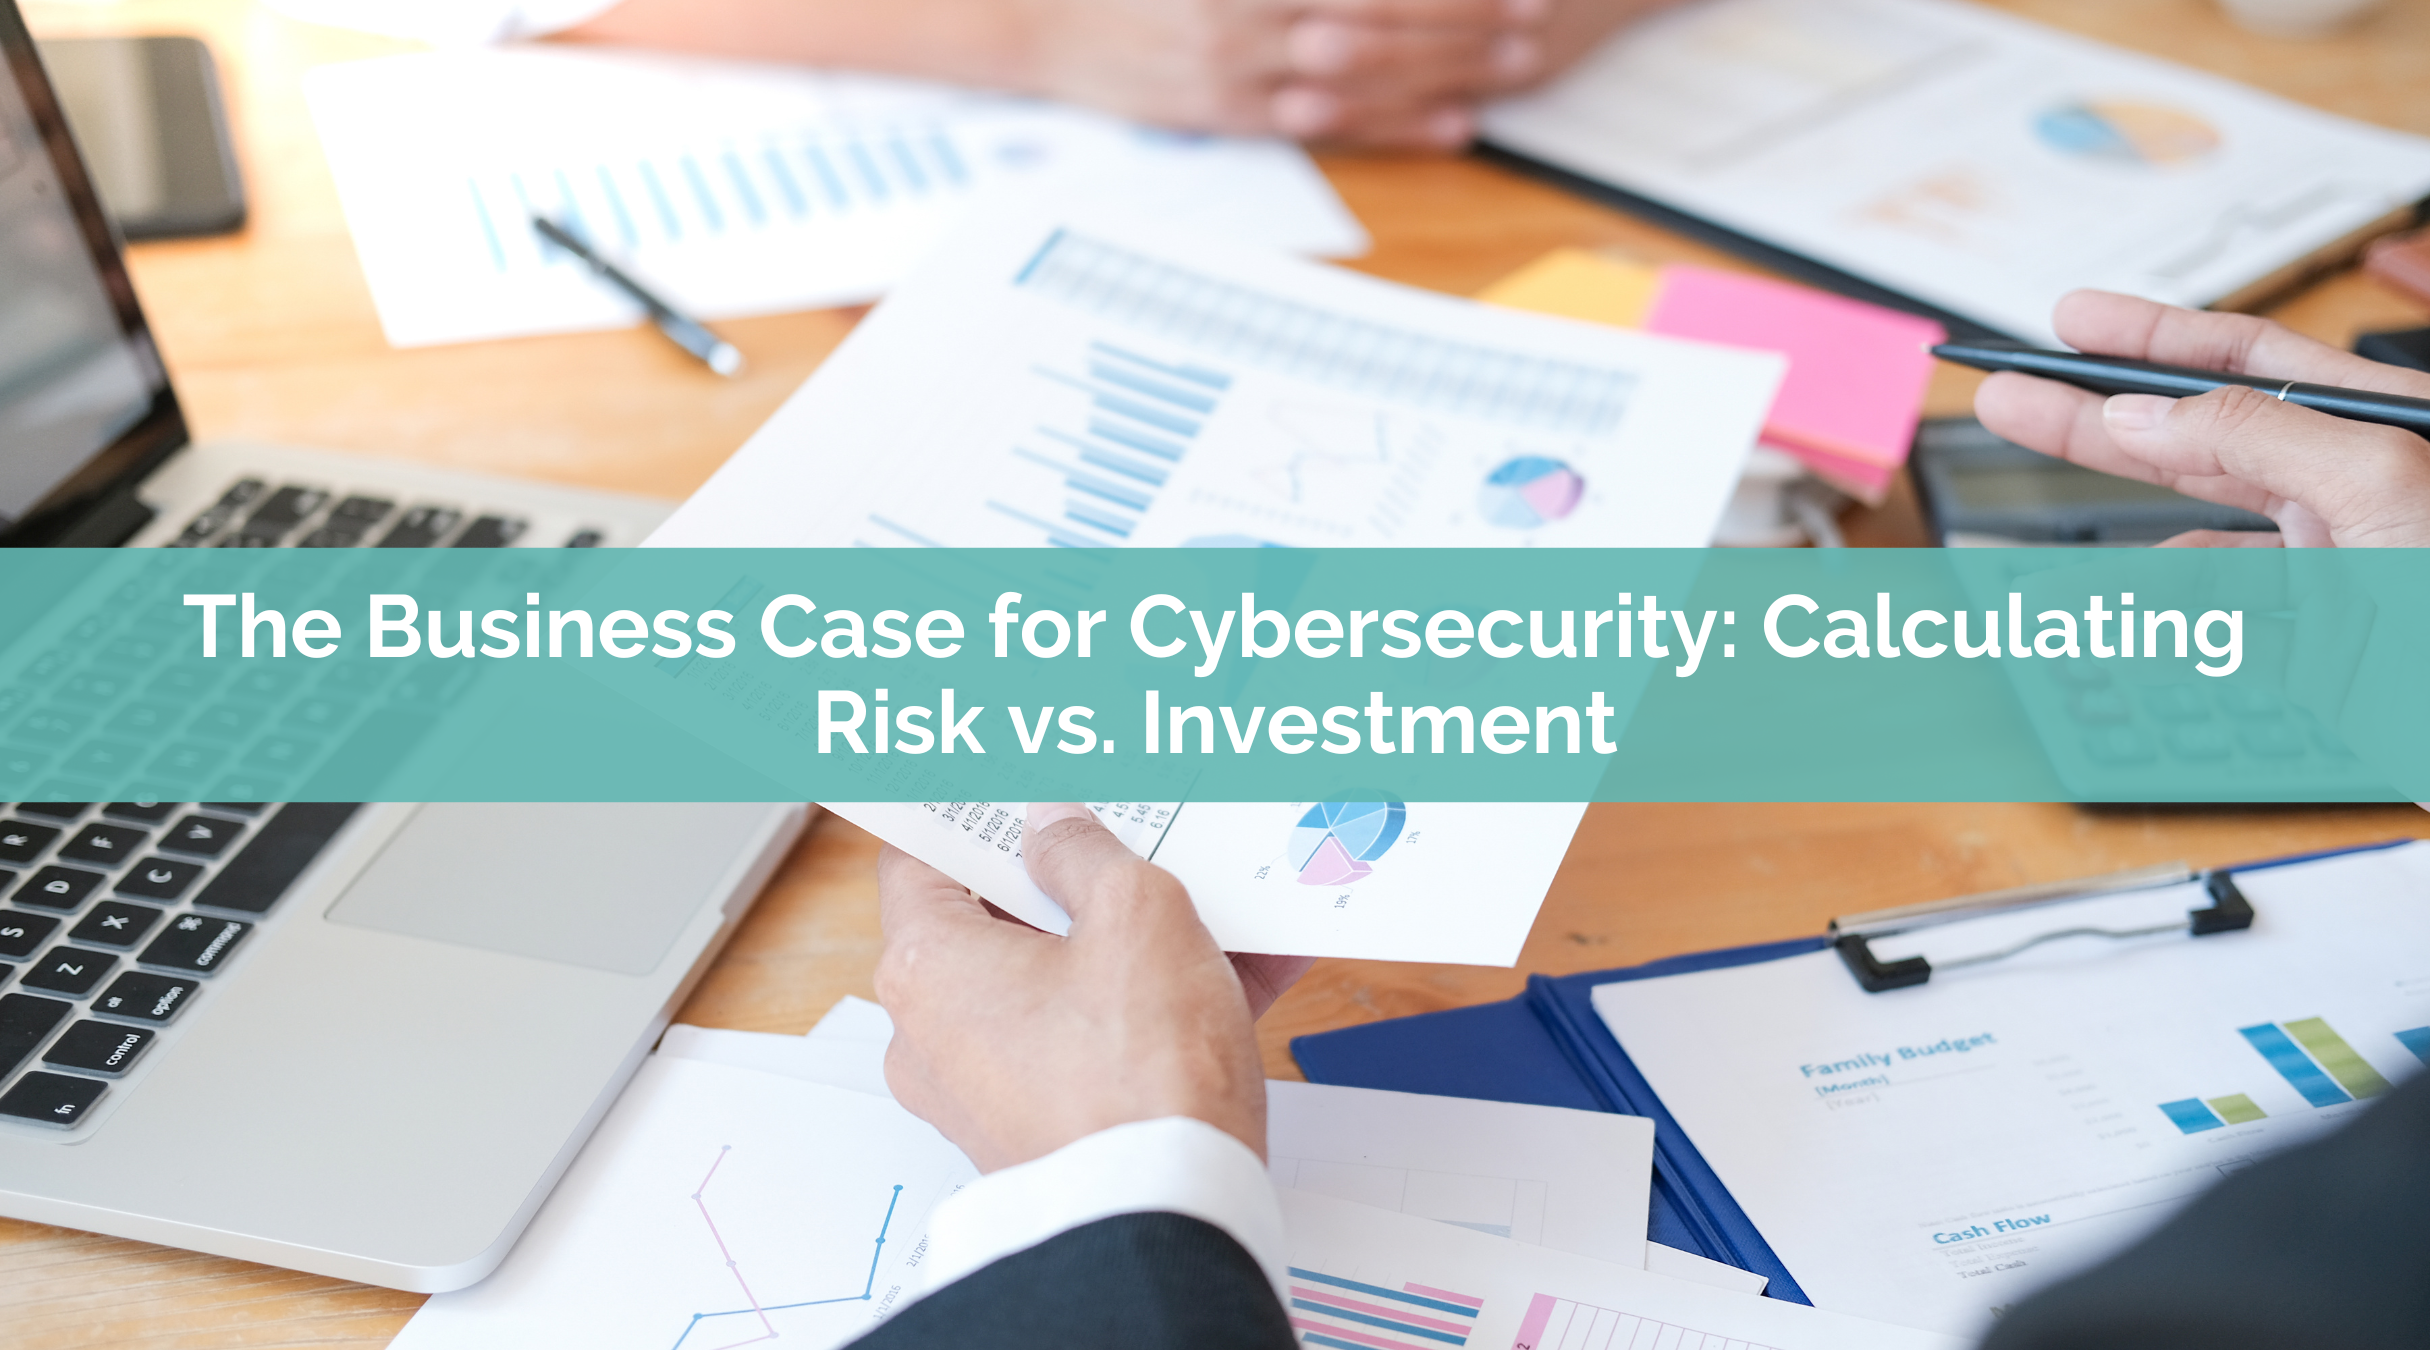 The Business Case for Cybersecurity: Calculating Risk vs. Investment